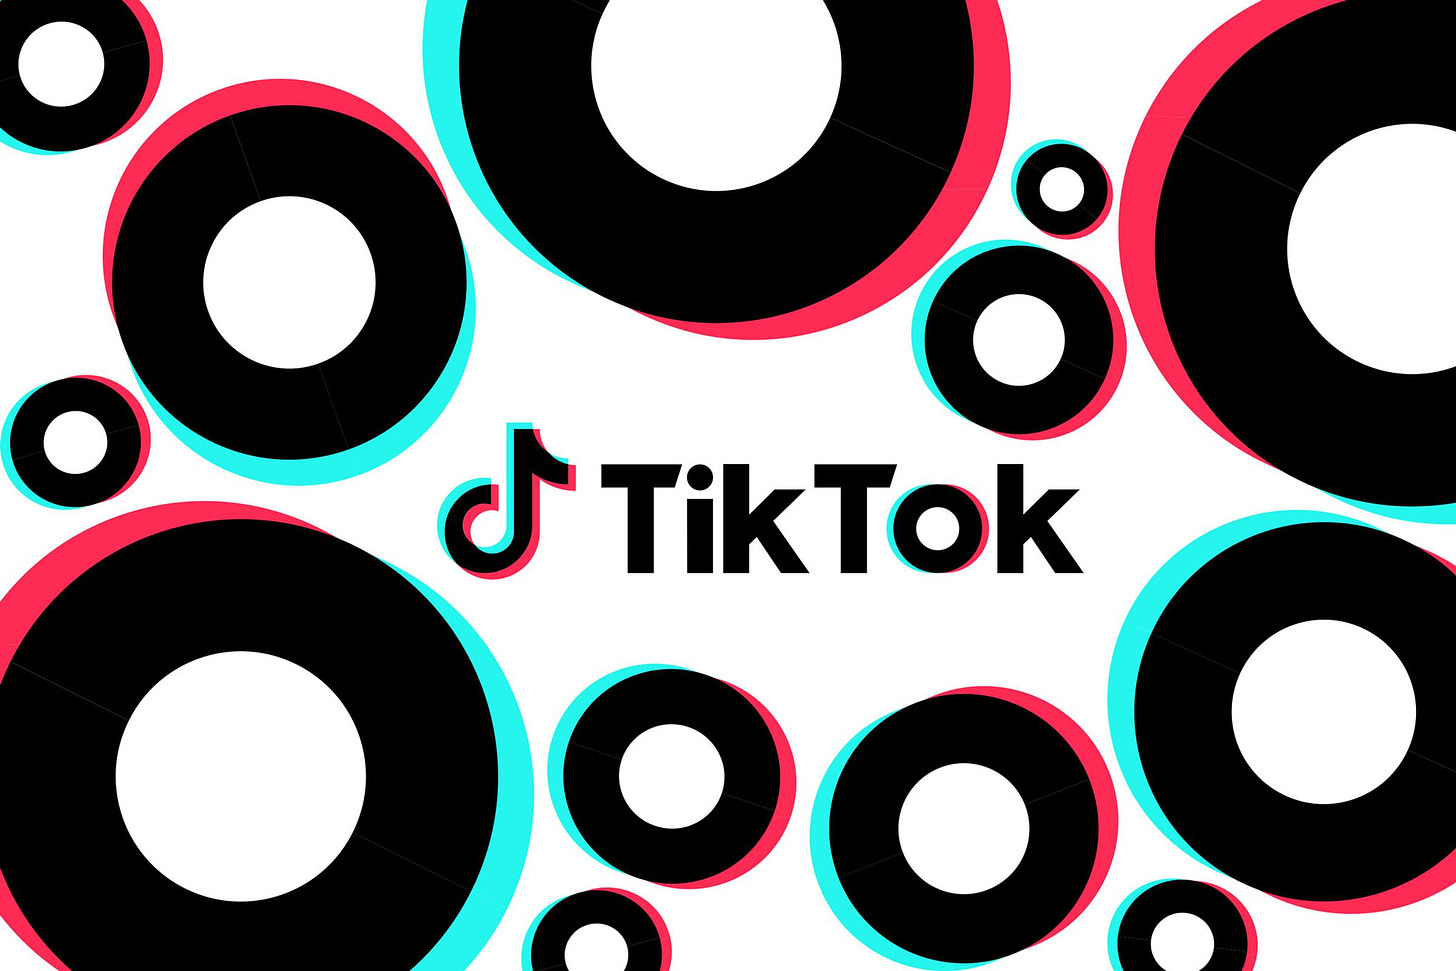 Ads are coming to TikTok search results - The Verge